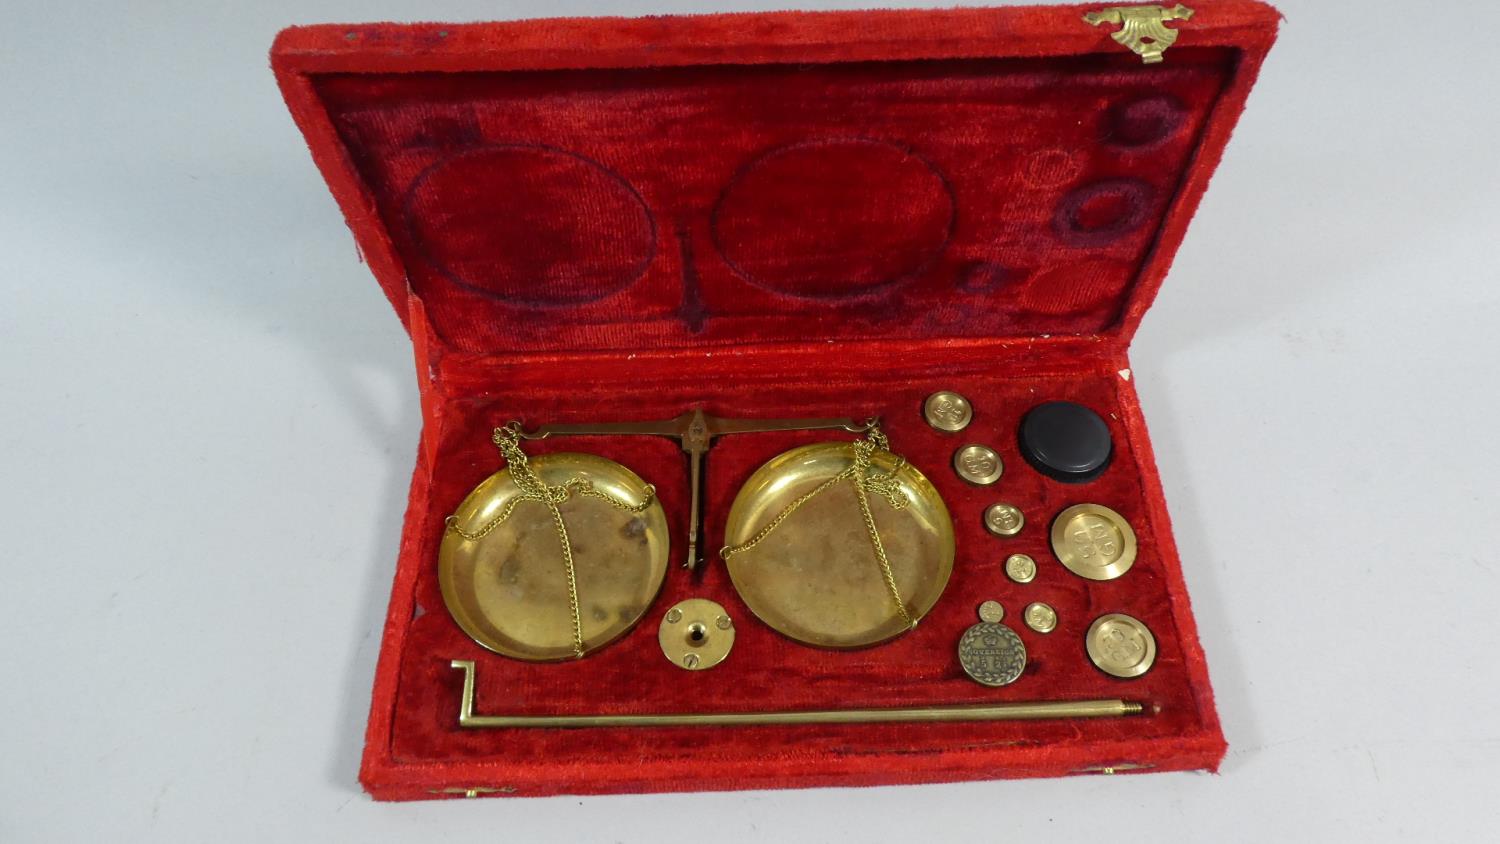 A Cased Set of Gold Scales and Weights - Image 2 of 2